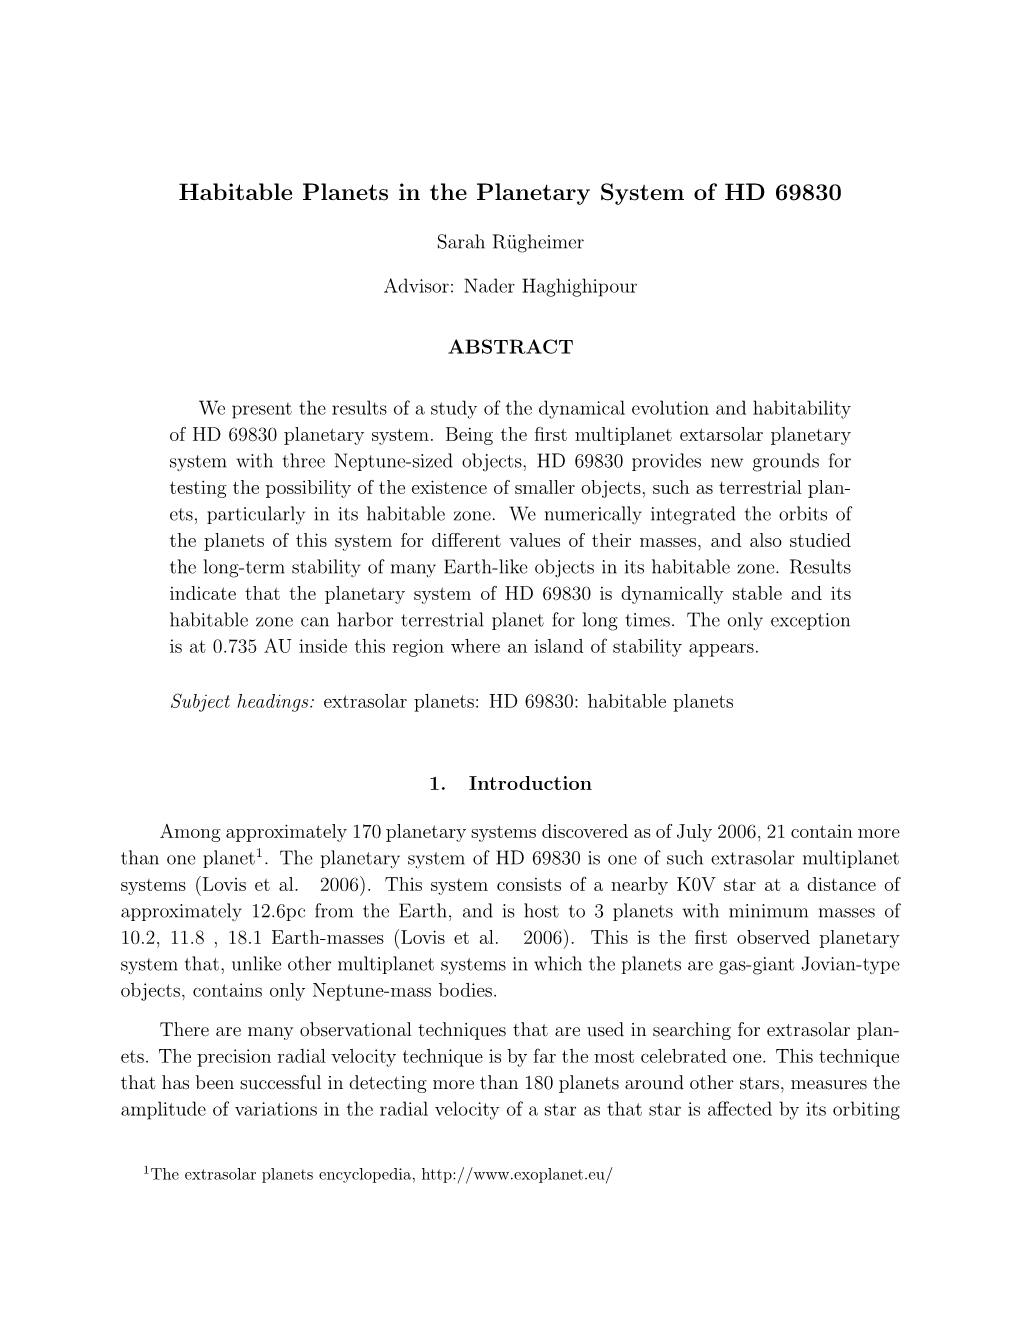 Habitable Planets in the Planetary System of HD 69830